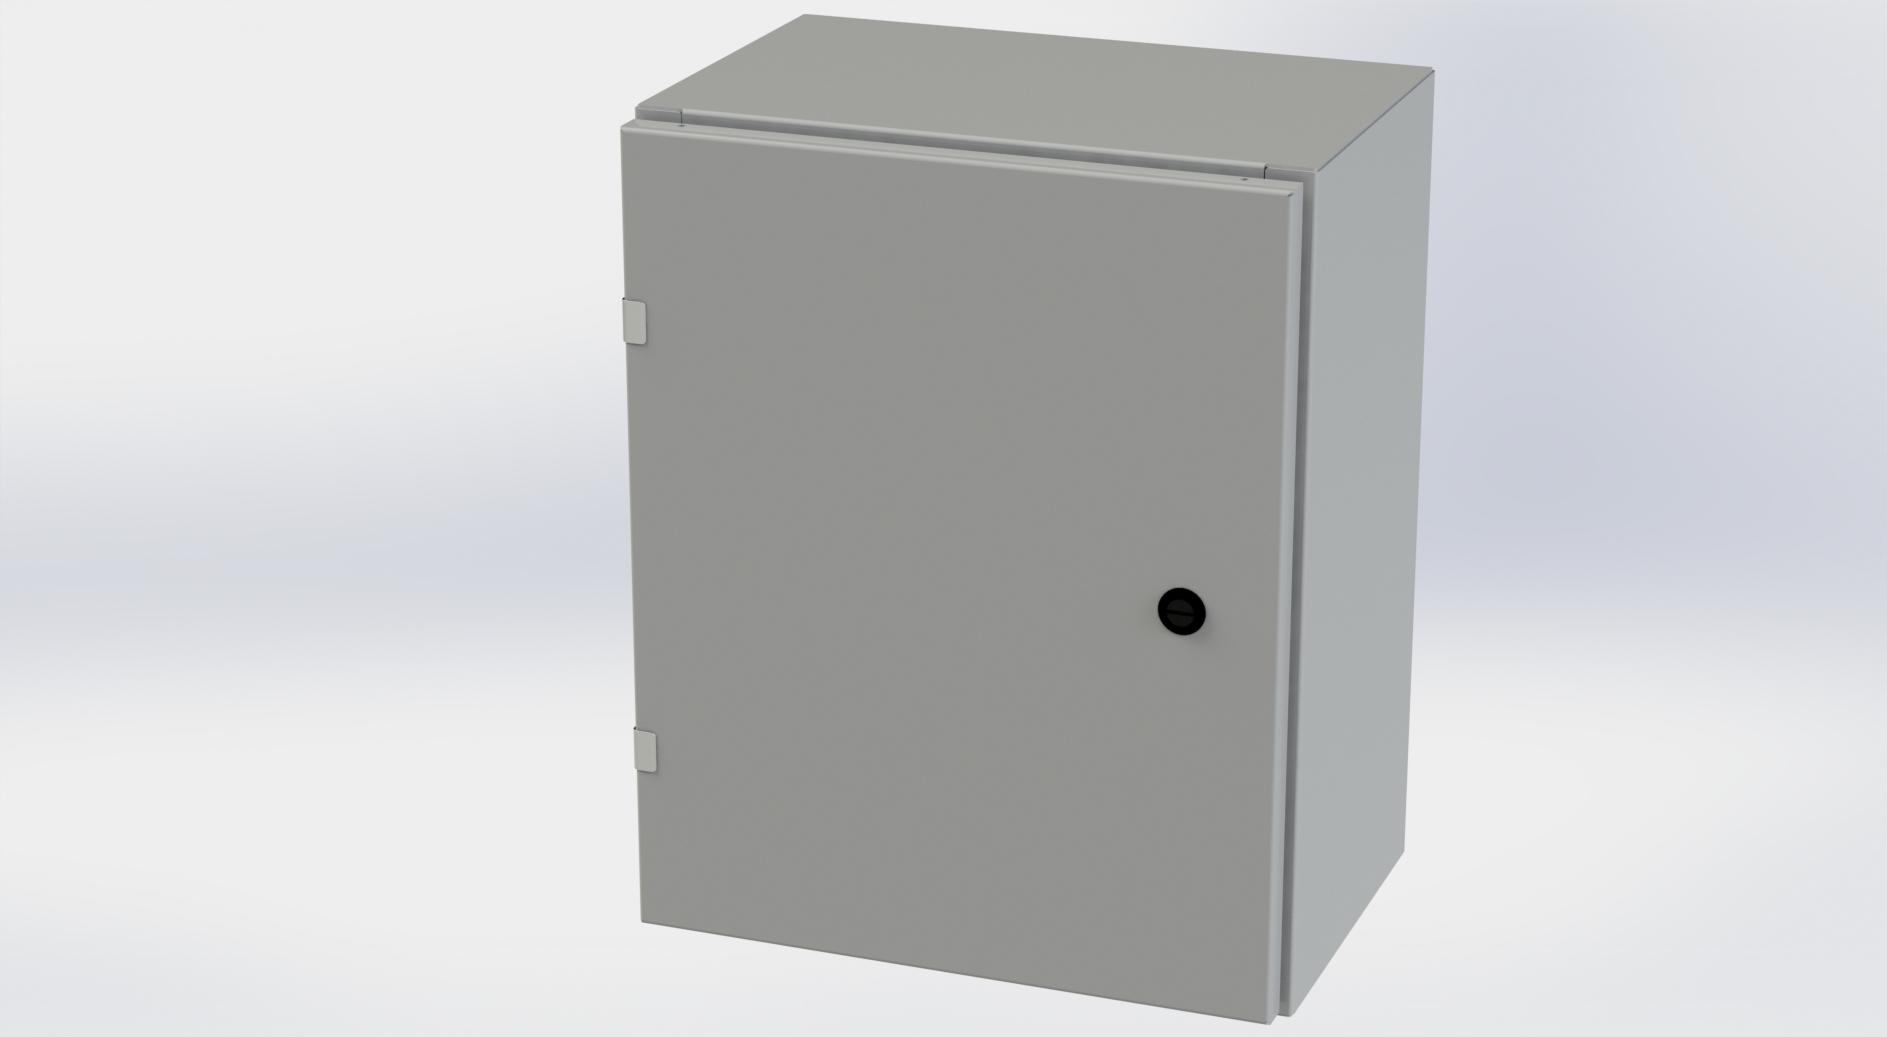 Saginaw Control SCE-20EL1610LP EL Enclosure, Height:20.00", Width:16.00", Depth:10.00", ANSI-61 gray powder coating inside and out. Optional sub-panels are powder coated white.